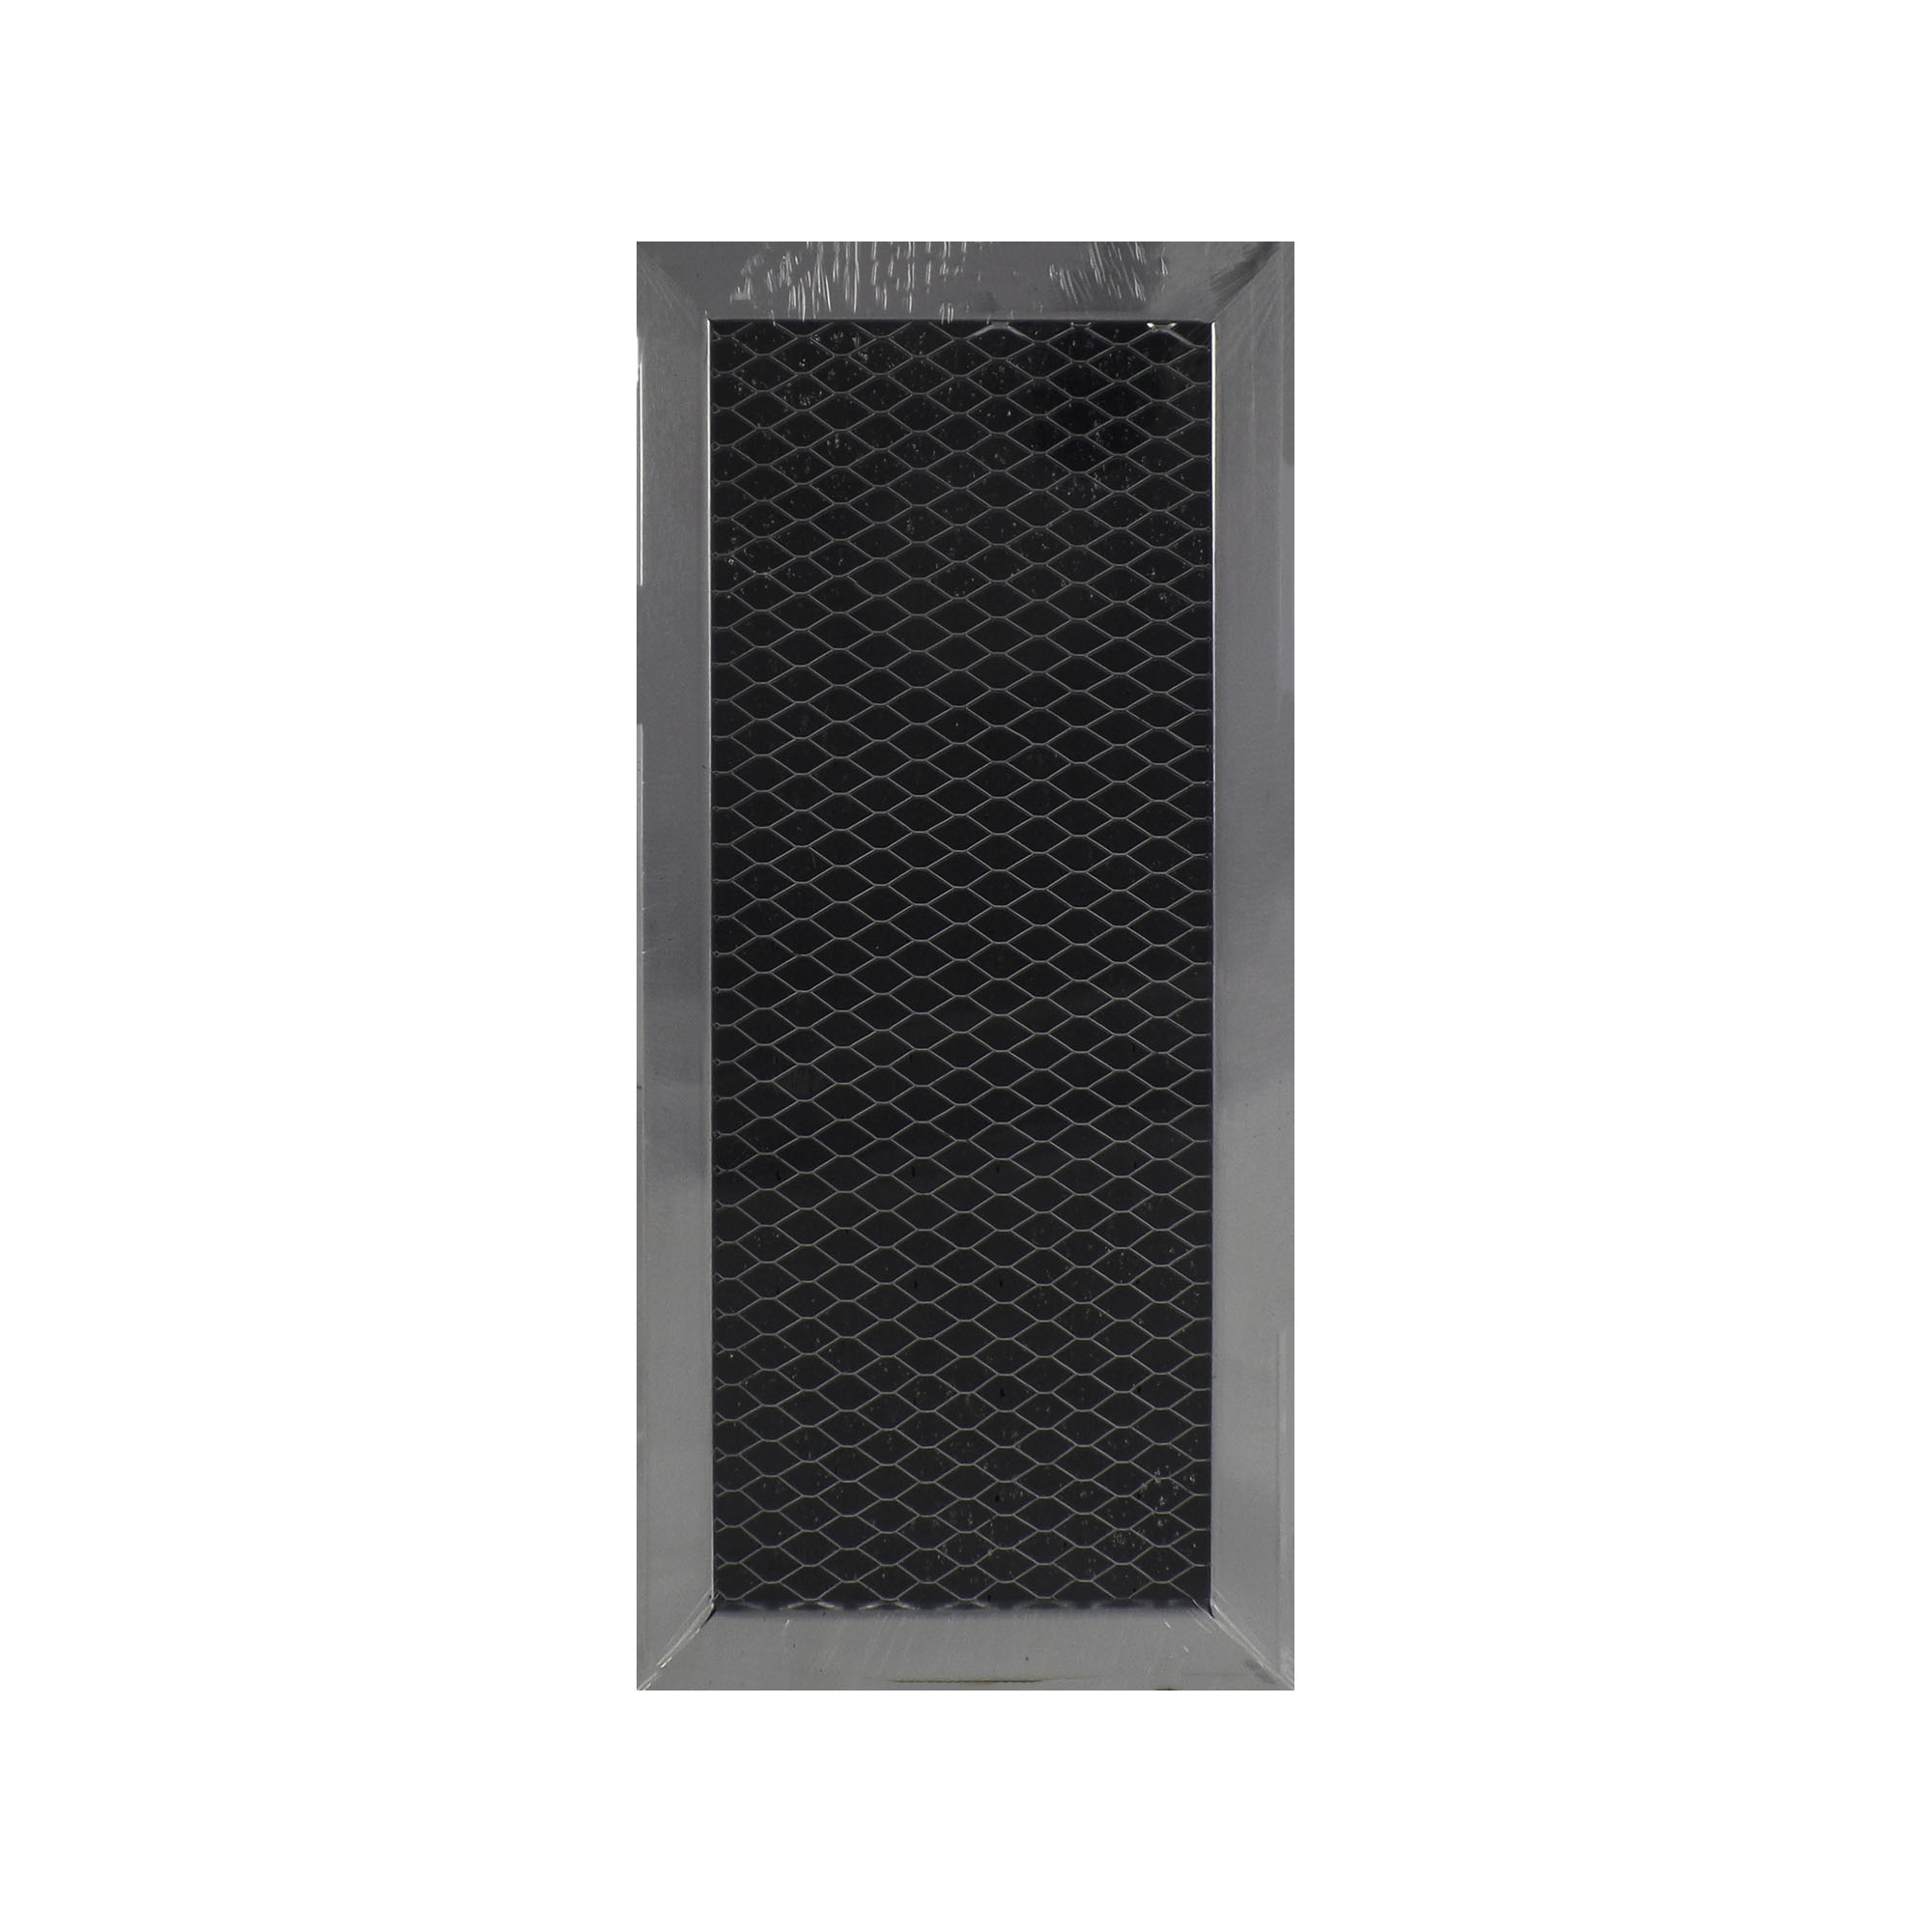 1 Microwave Charcoal Filter For Samsung ME18H704SFS ME21H706MQS 4 x 8 10/16" 